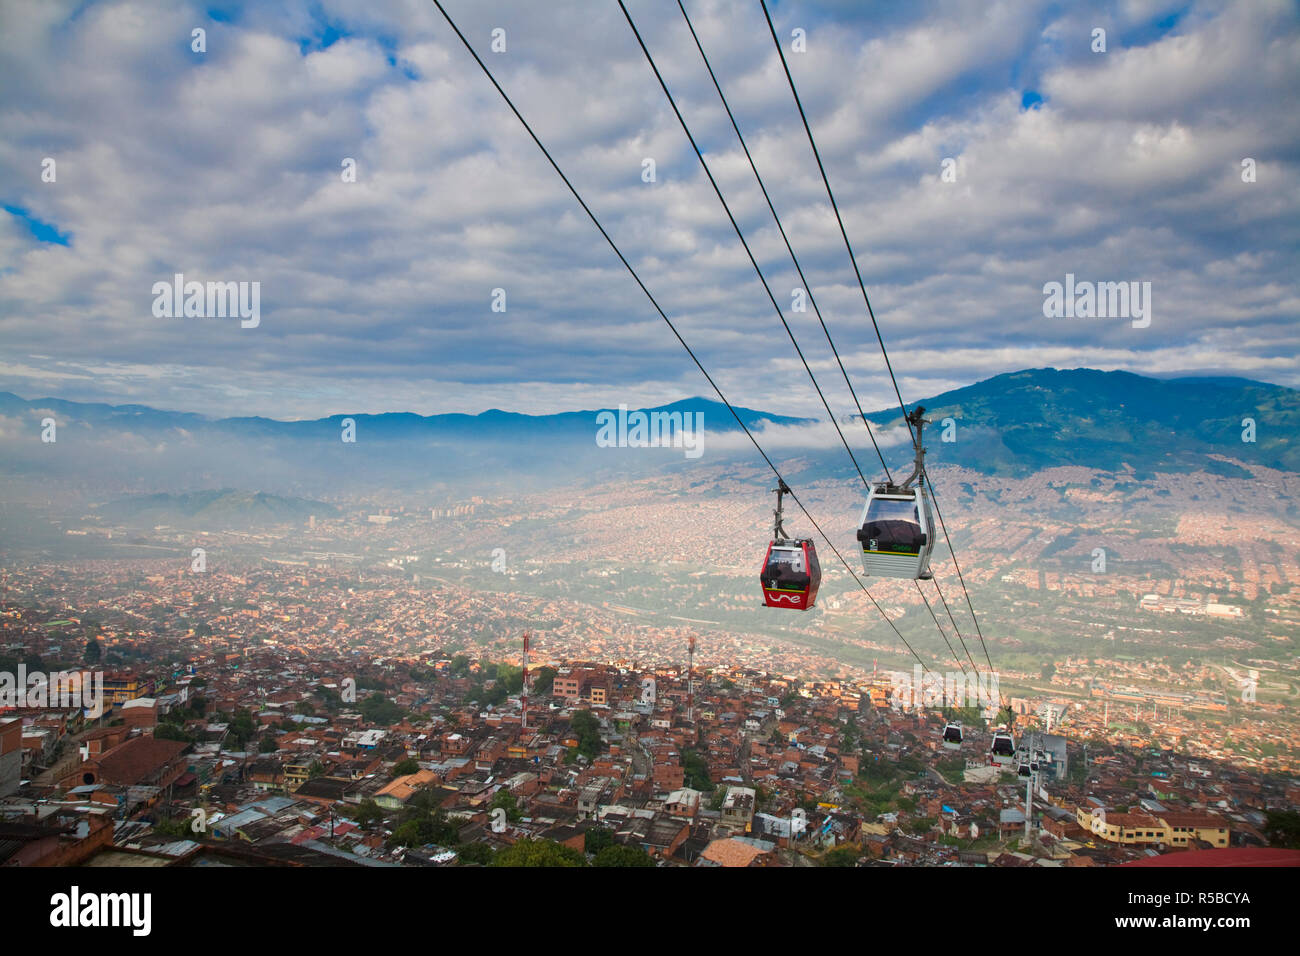 Colombia, Antioquia, Medellin, Santo Domingo, Cable car on the metro metrocable extension Stock Photo